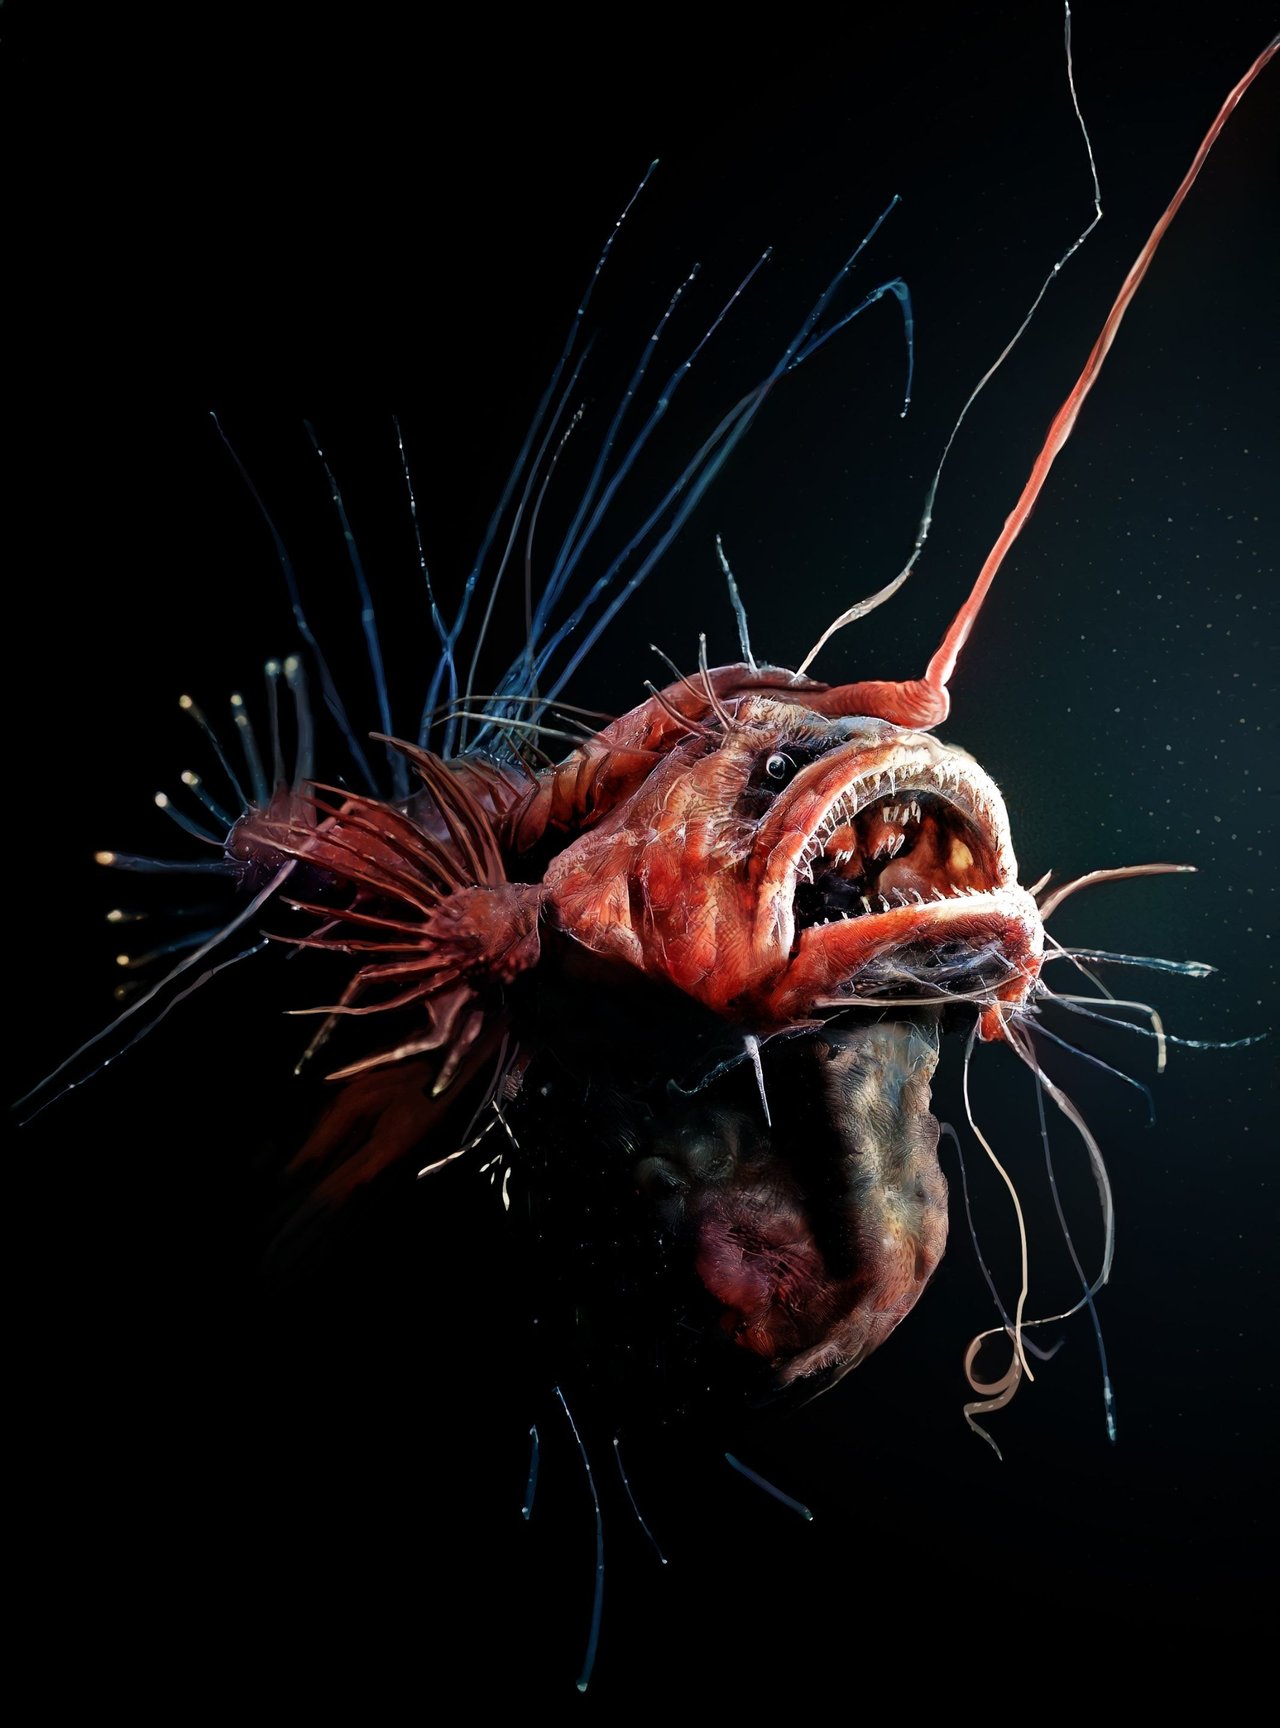 Science: a look inside the belly of the hairy angler